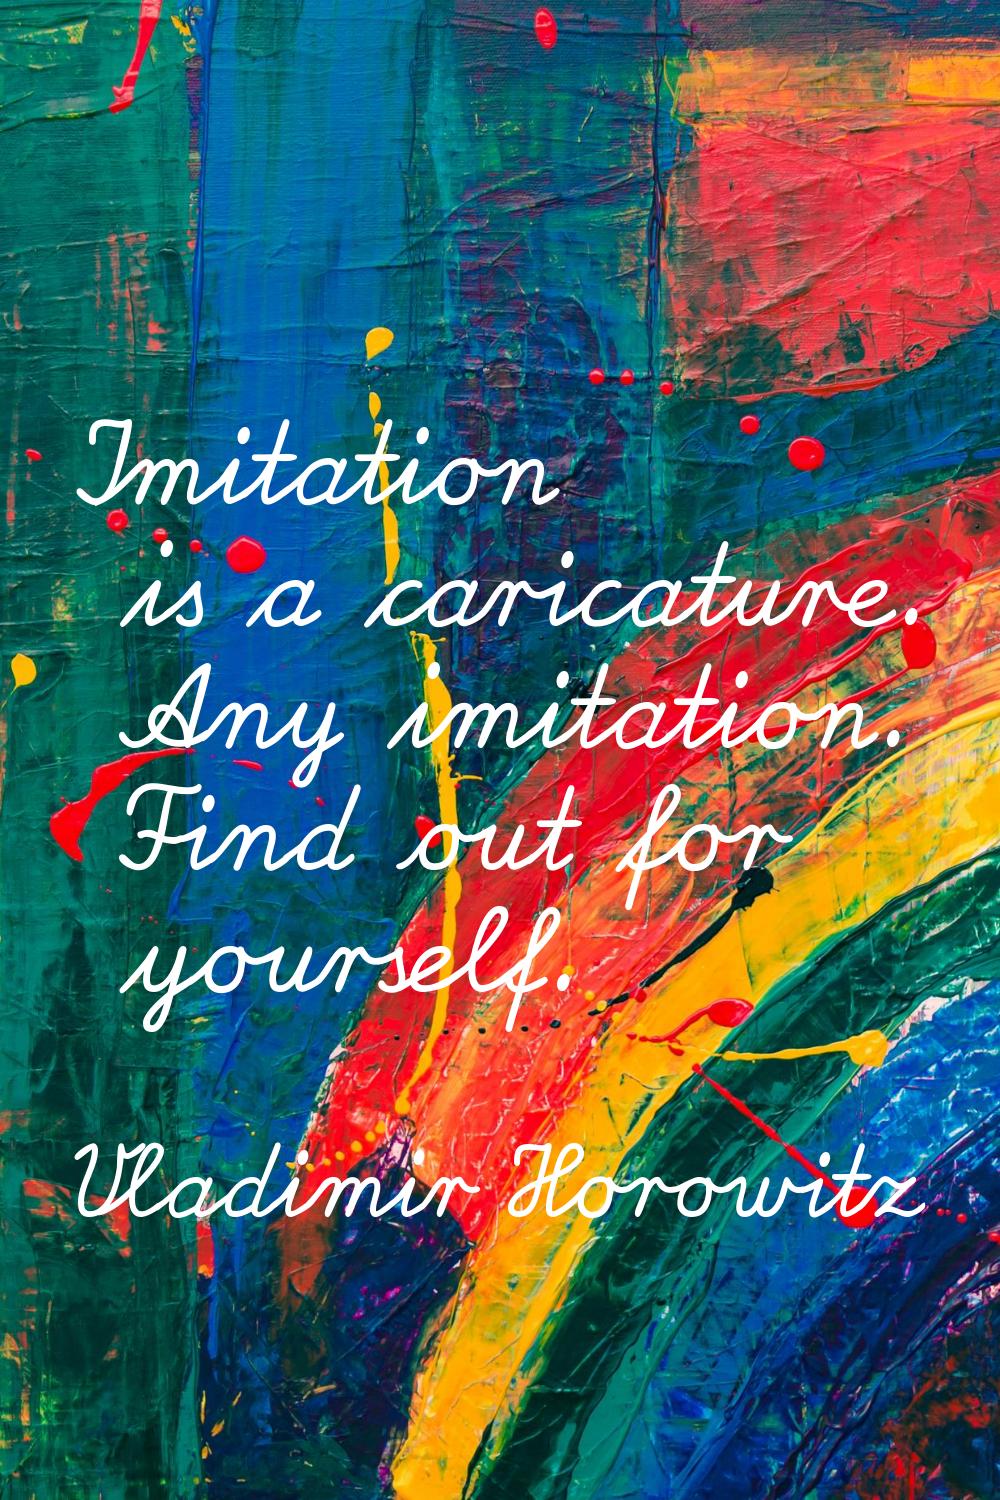 Imitation is a caricature. Any imitation. Find out for yourself.